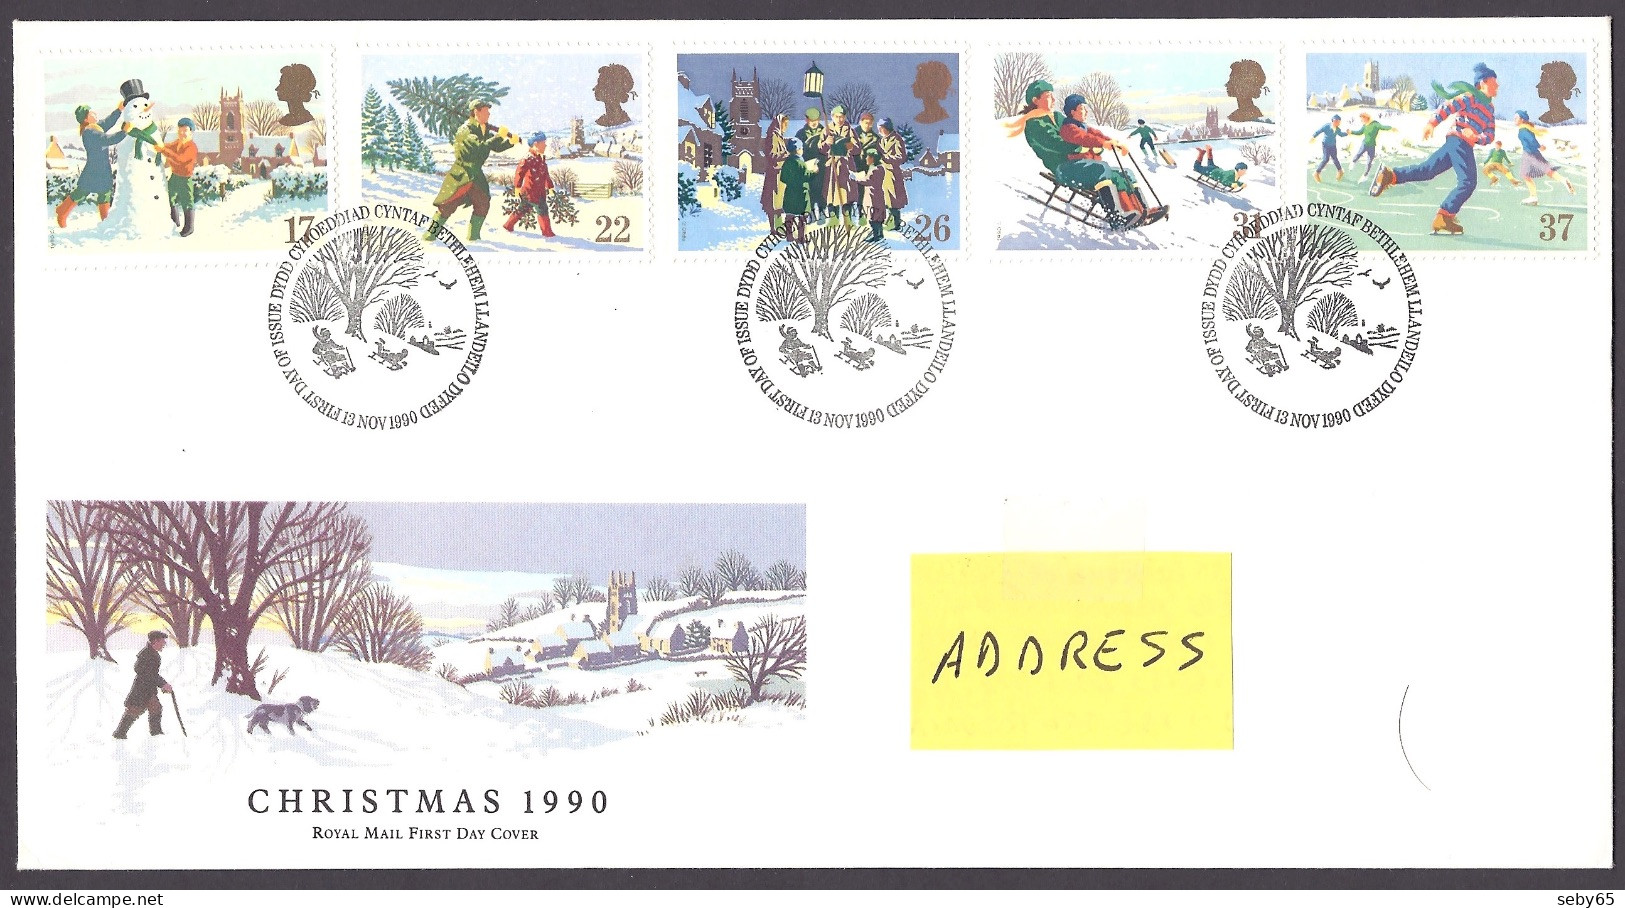 Great Britain 1990 - Christmas, Noel, Nativity, Natale, Weihnachten, Winter Scenes, Sled, Skating - FDC First Day Cover - 1981-1990 Decimal Issues